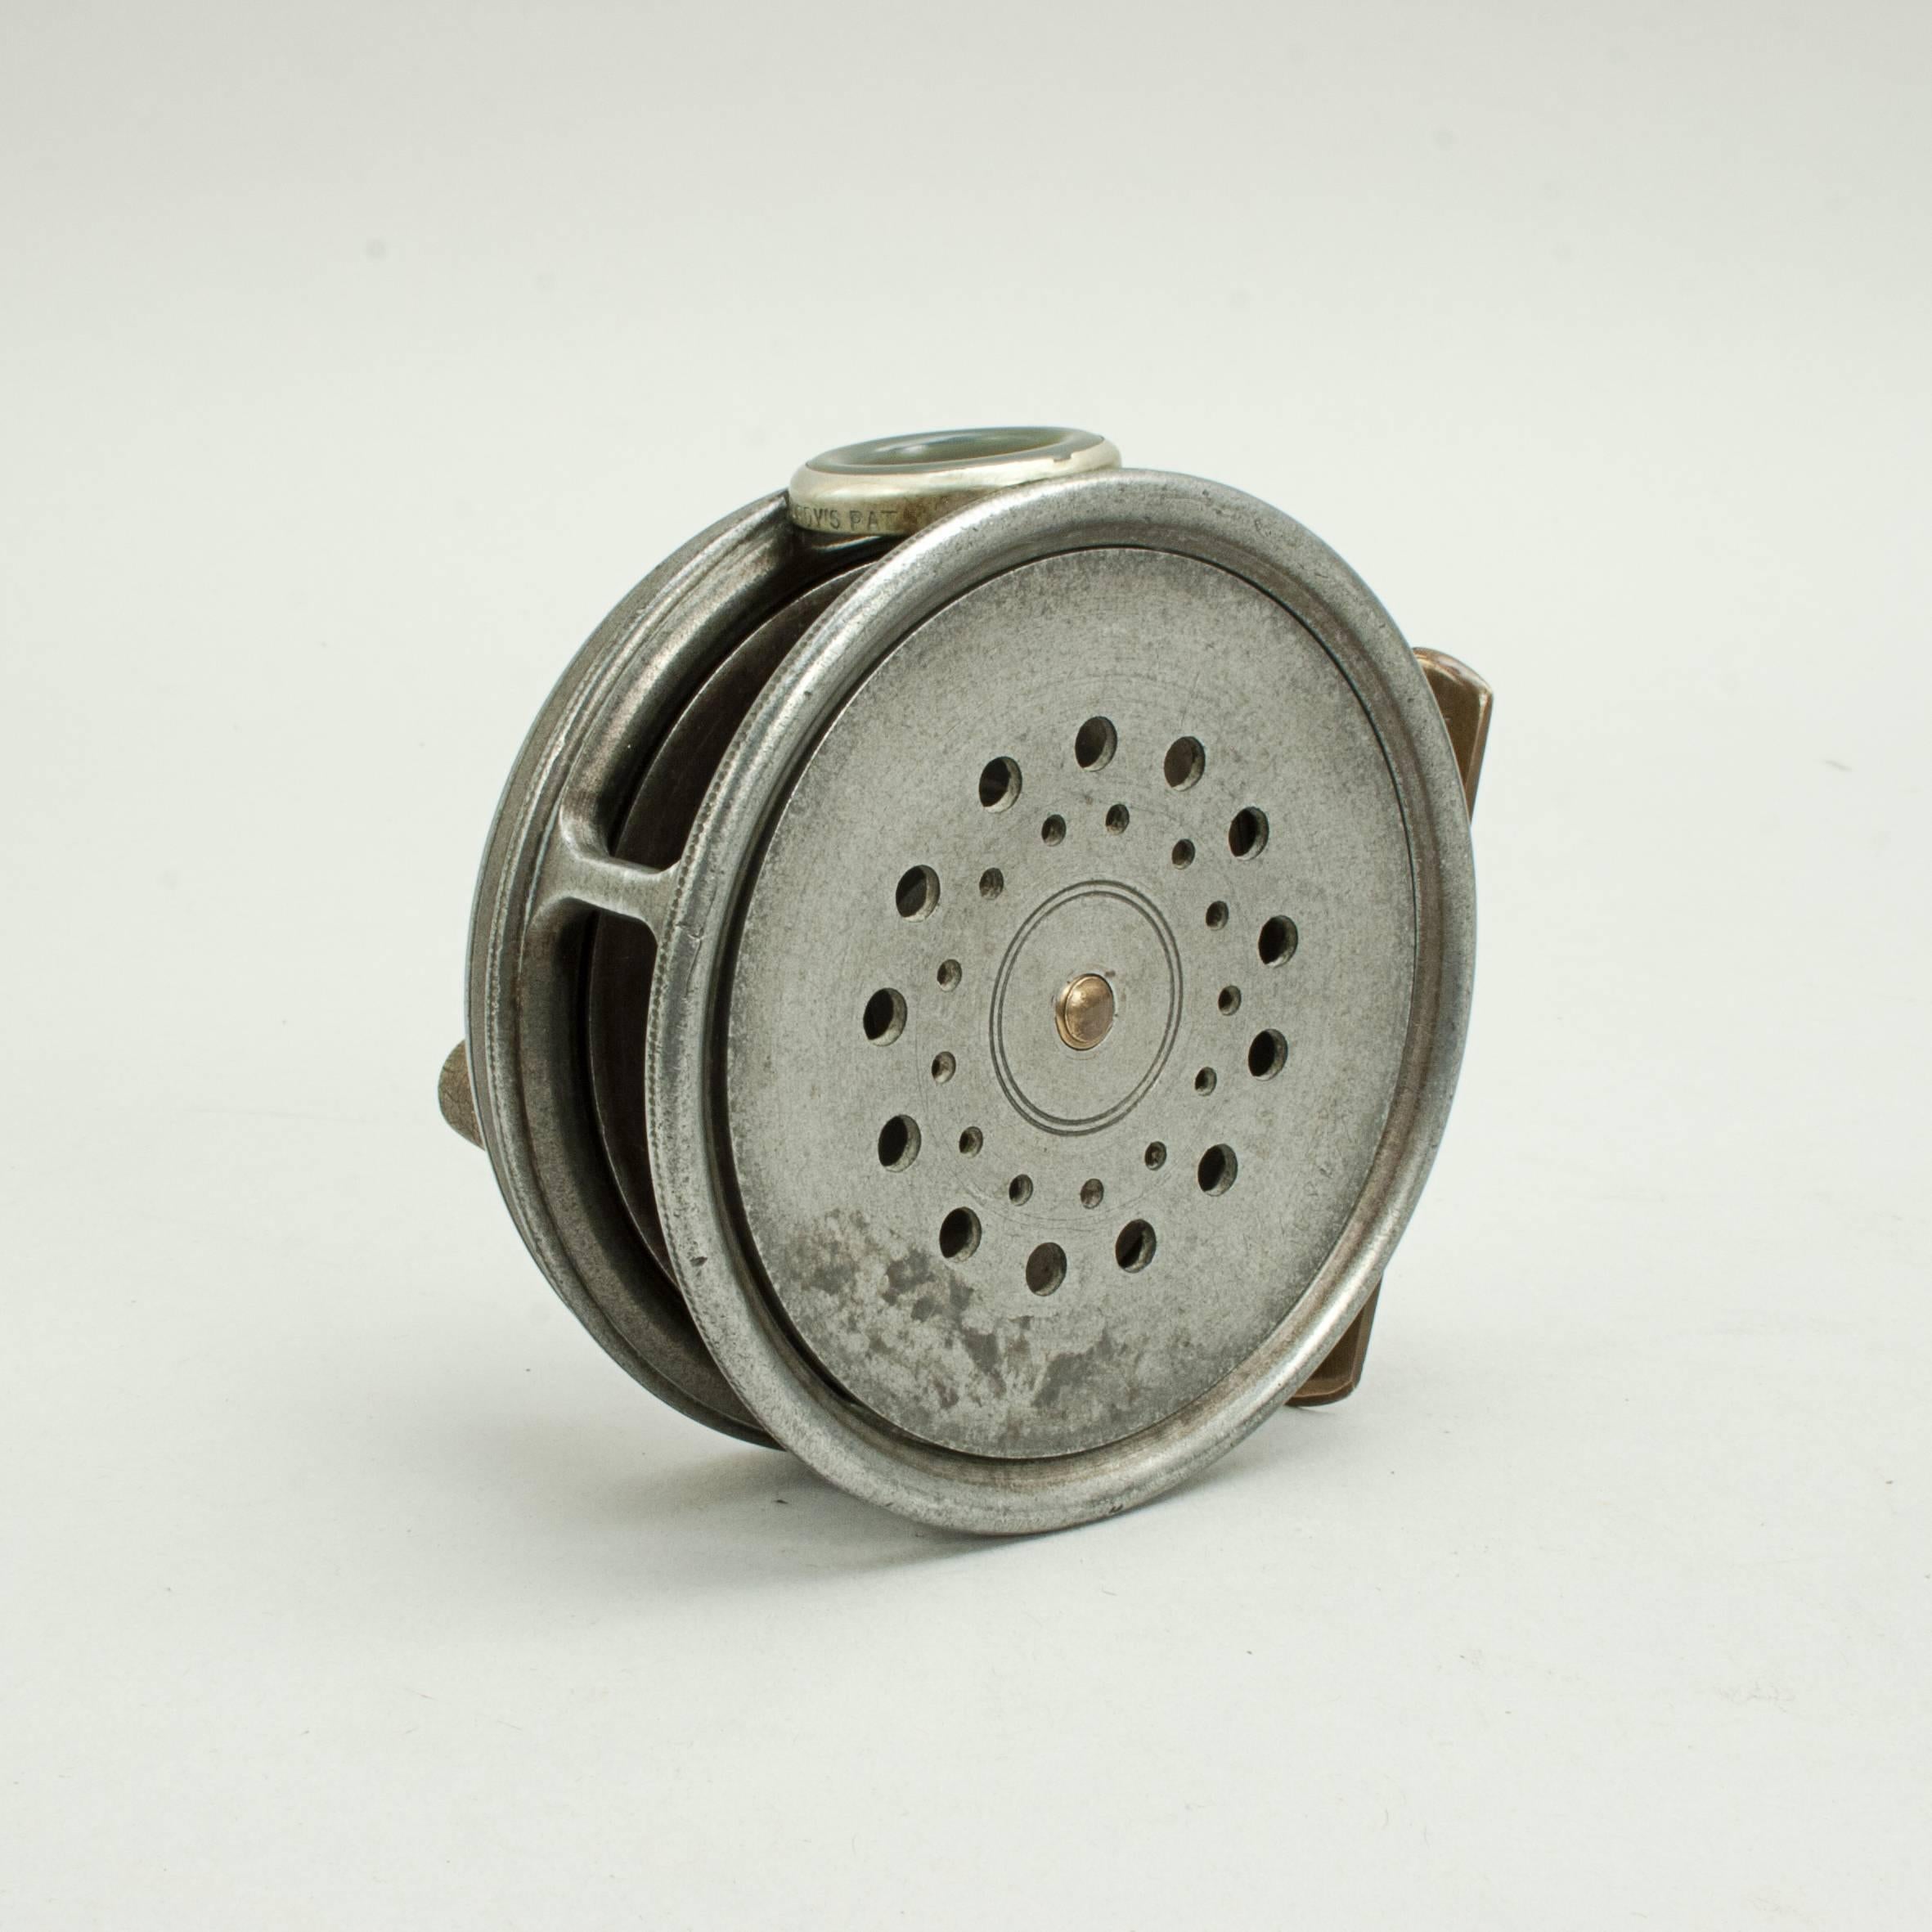 English Hardy Perfect Trout Fishing Reel